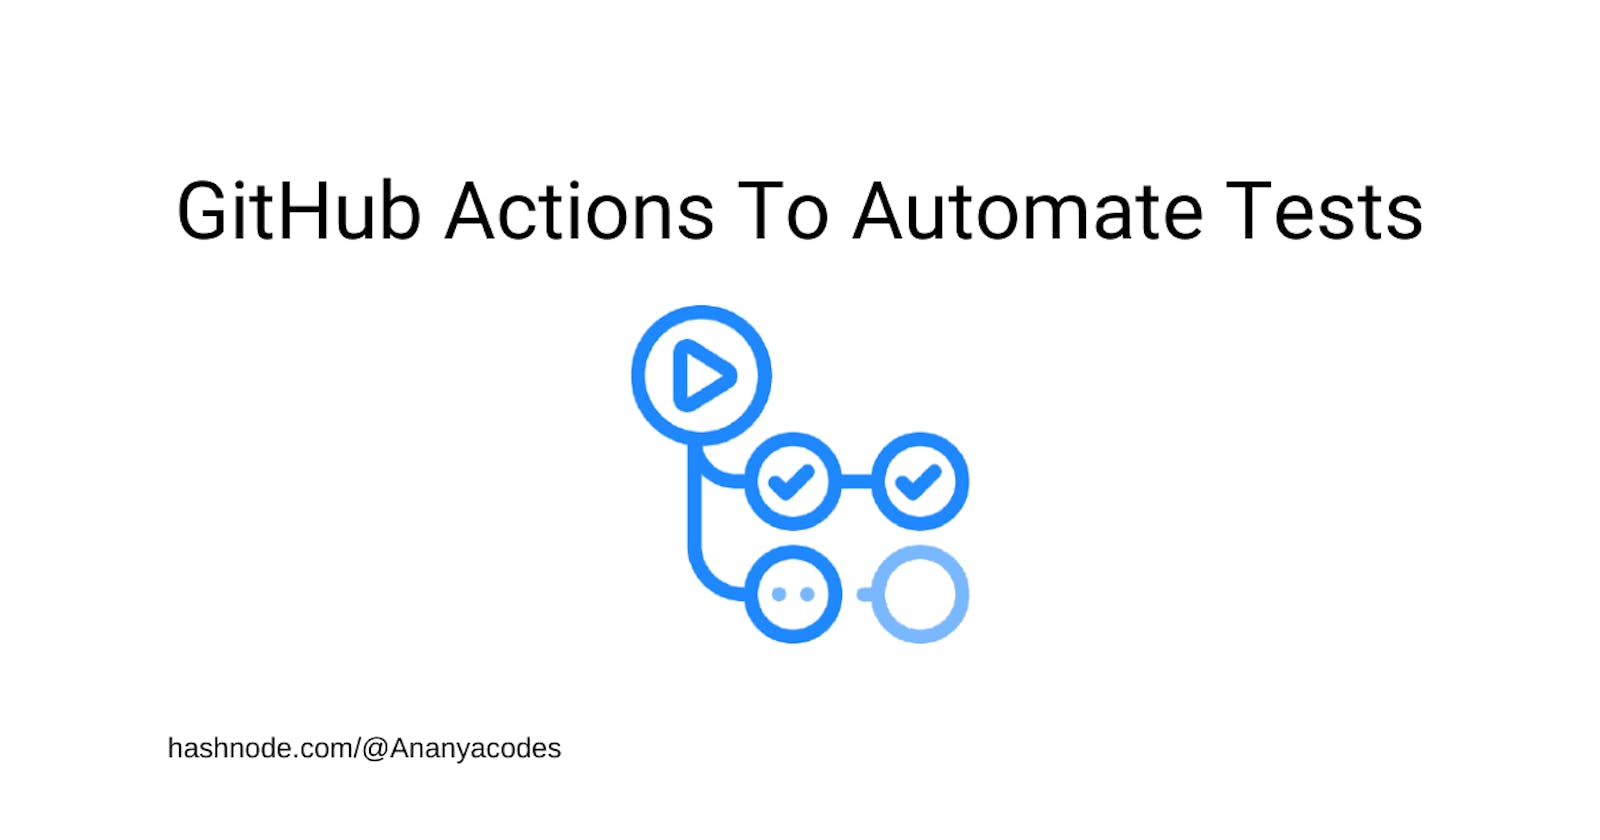 GitHub Actions To Automate Tests